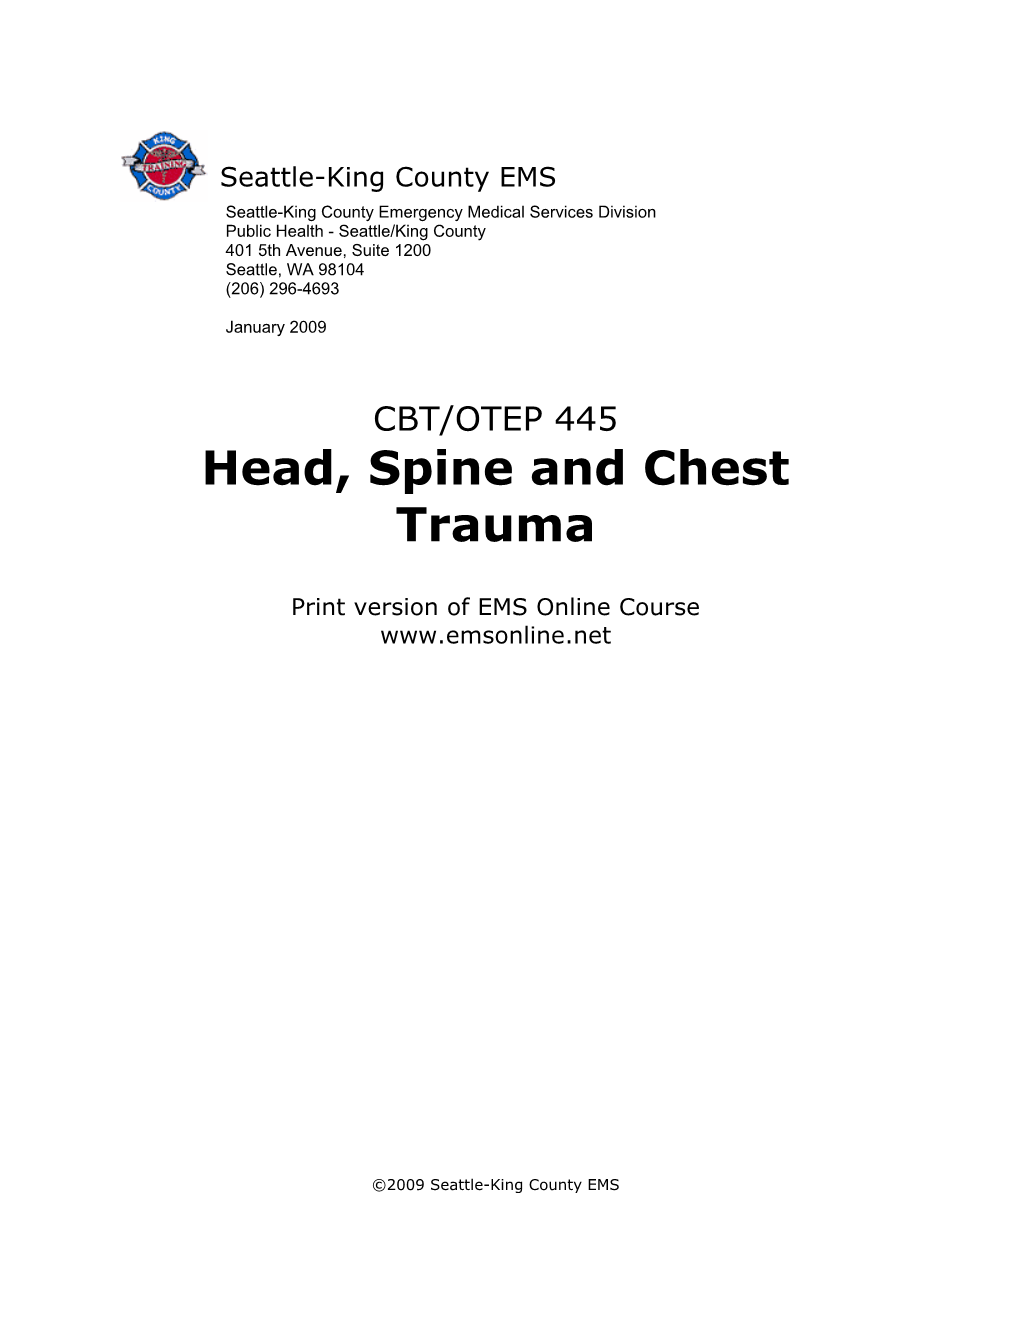 Head, Spine and Chest Trauma